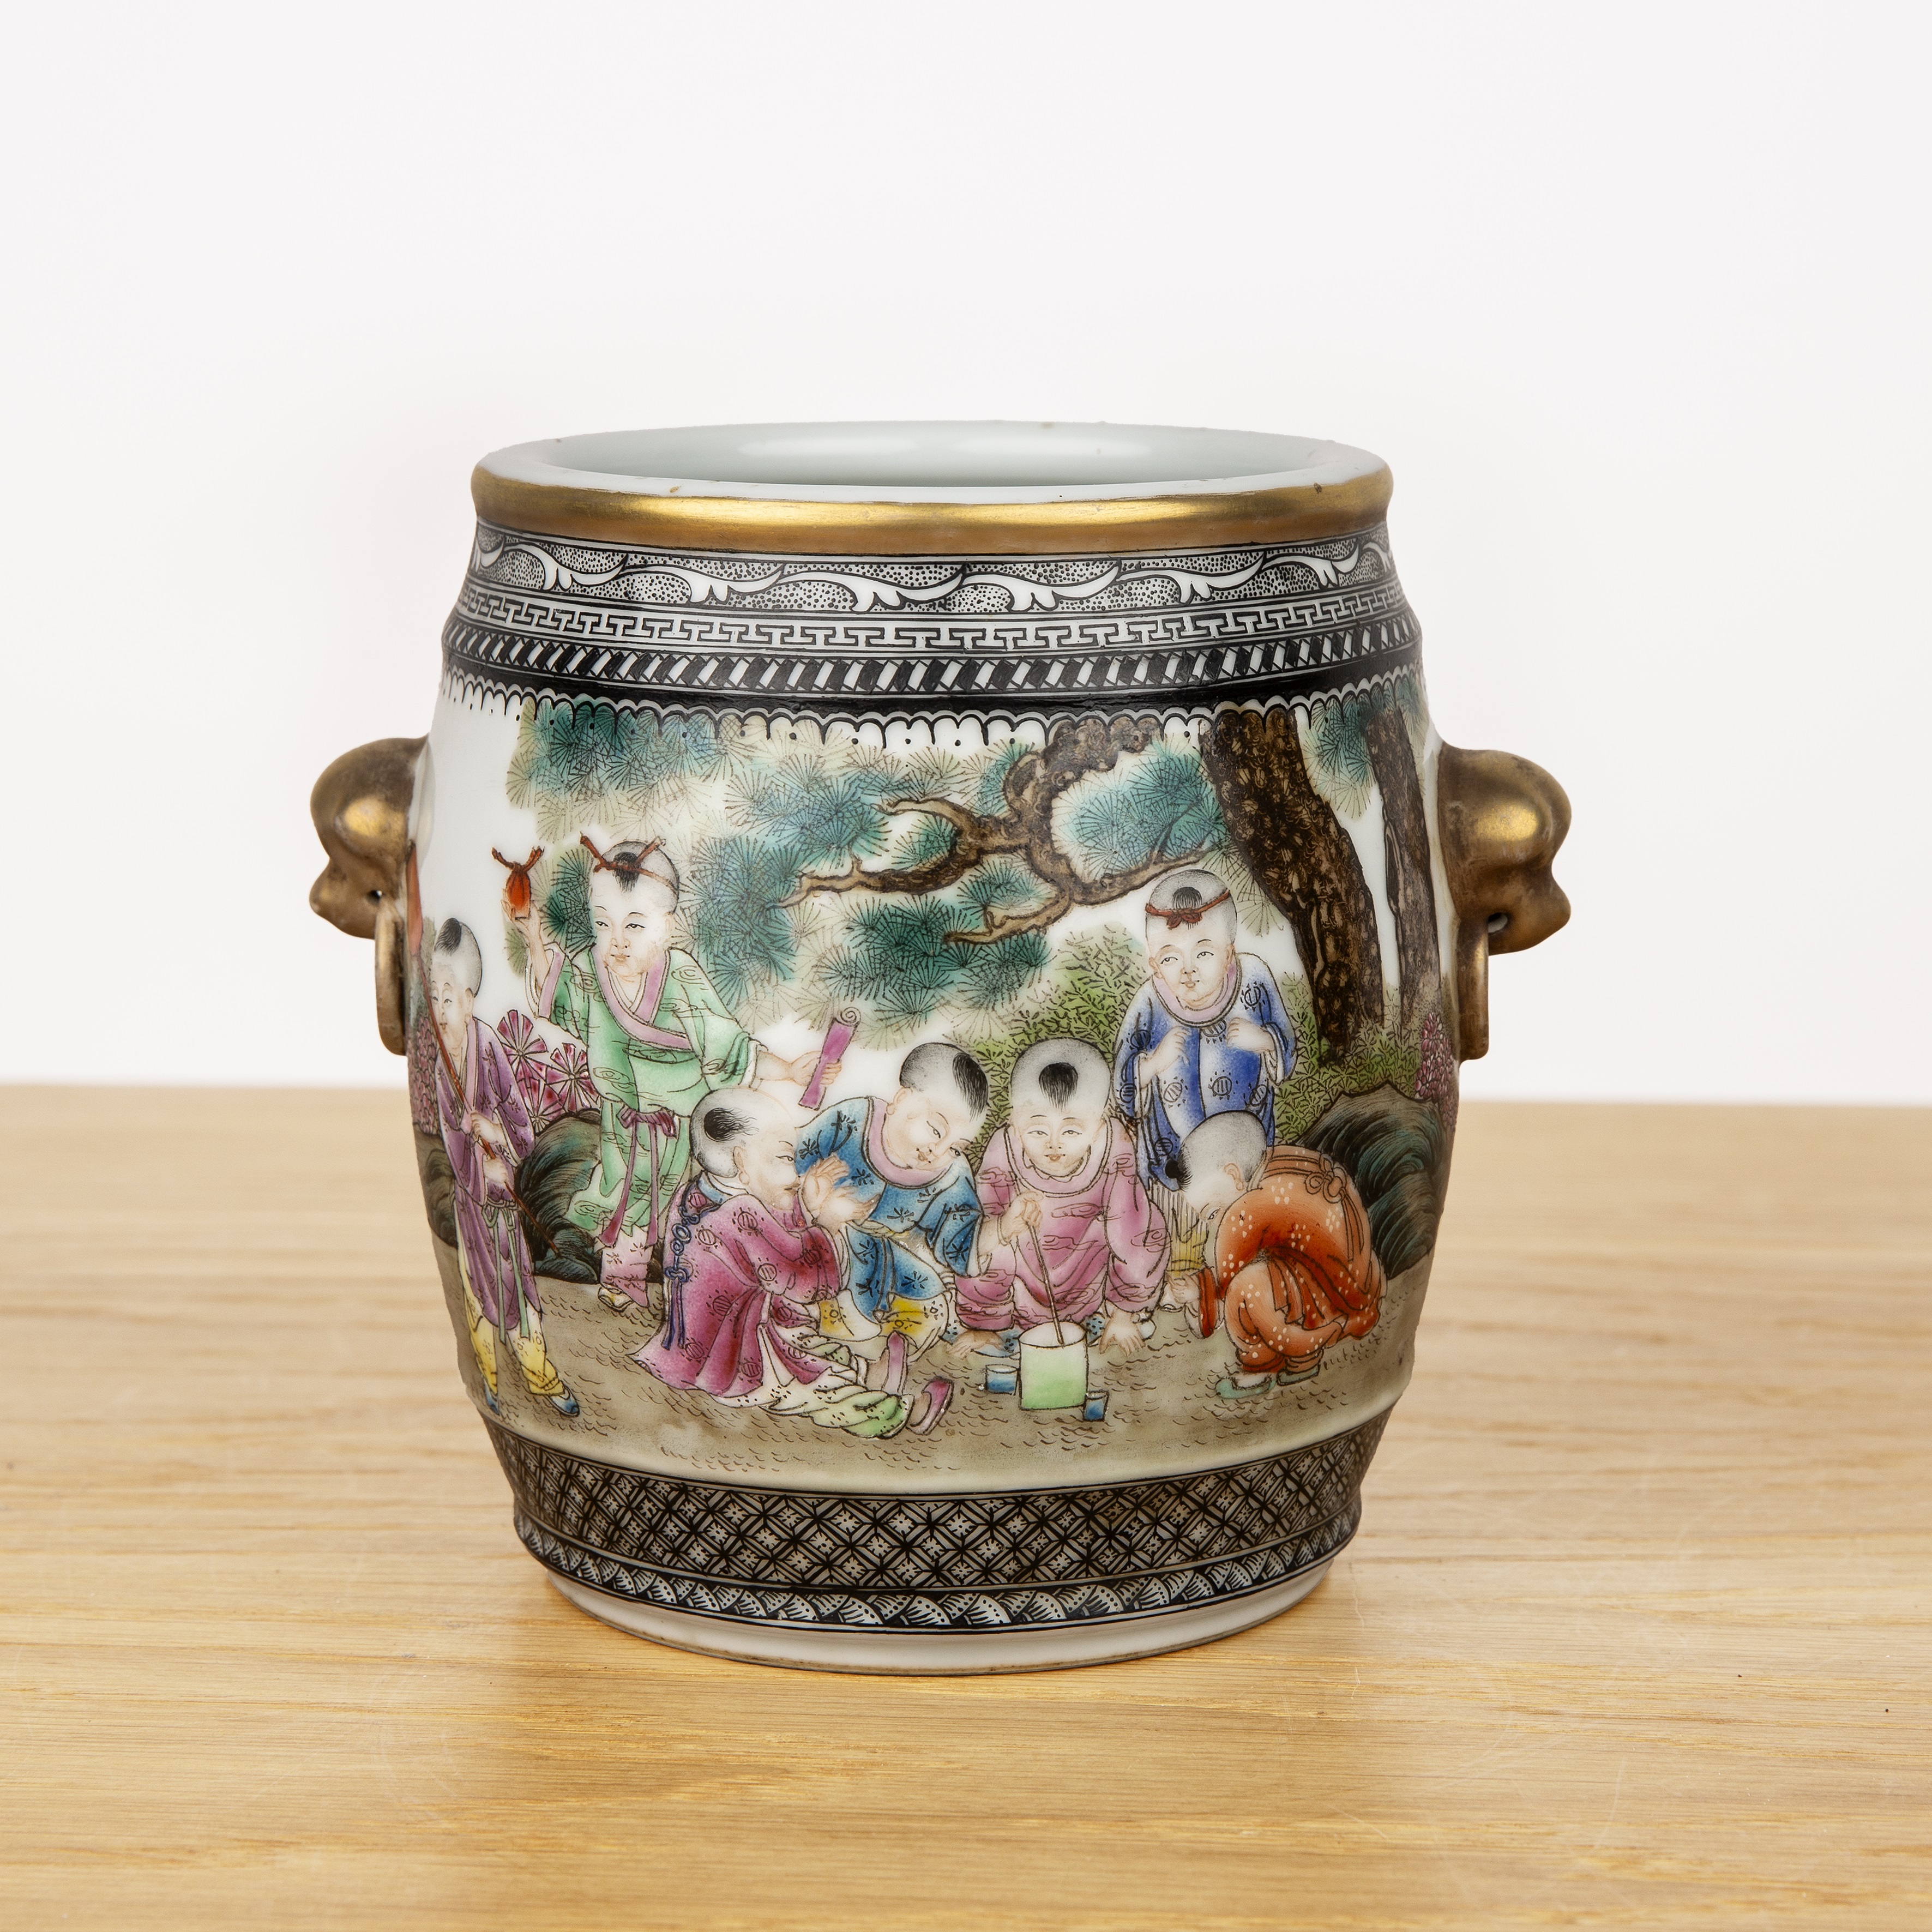 Porcelain barrel vase Chinese, Republic or later with a painted garden scene of children painting